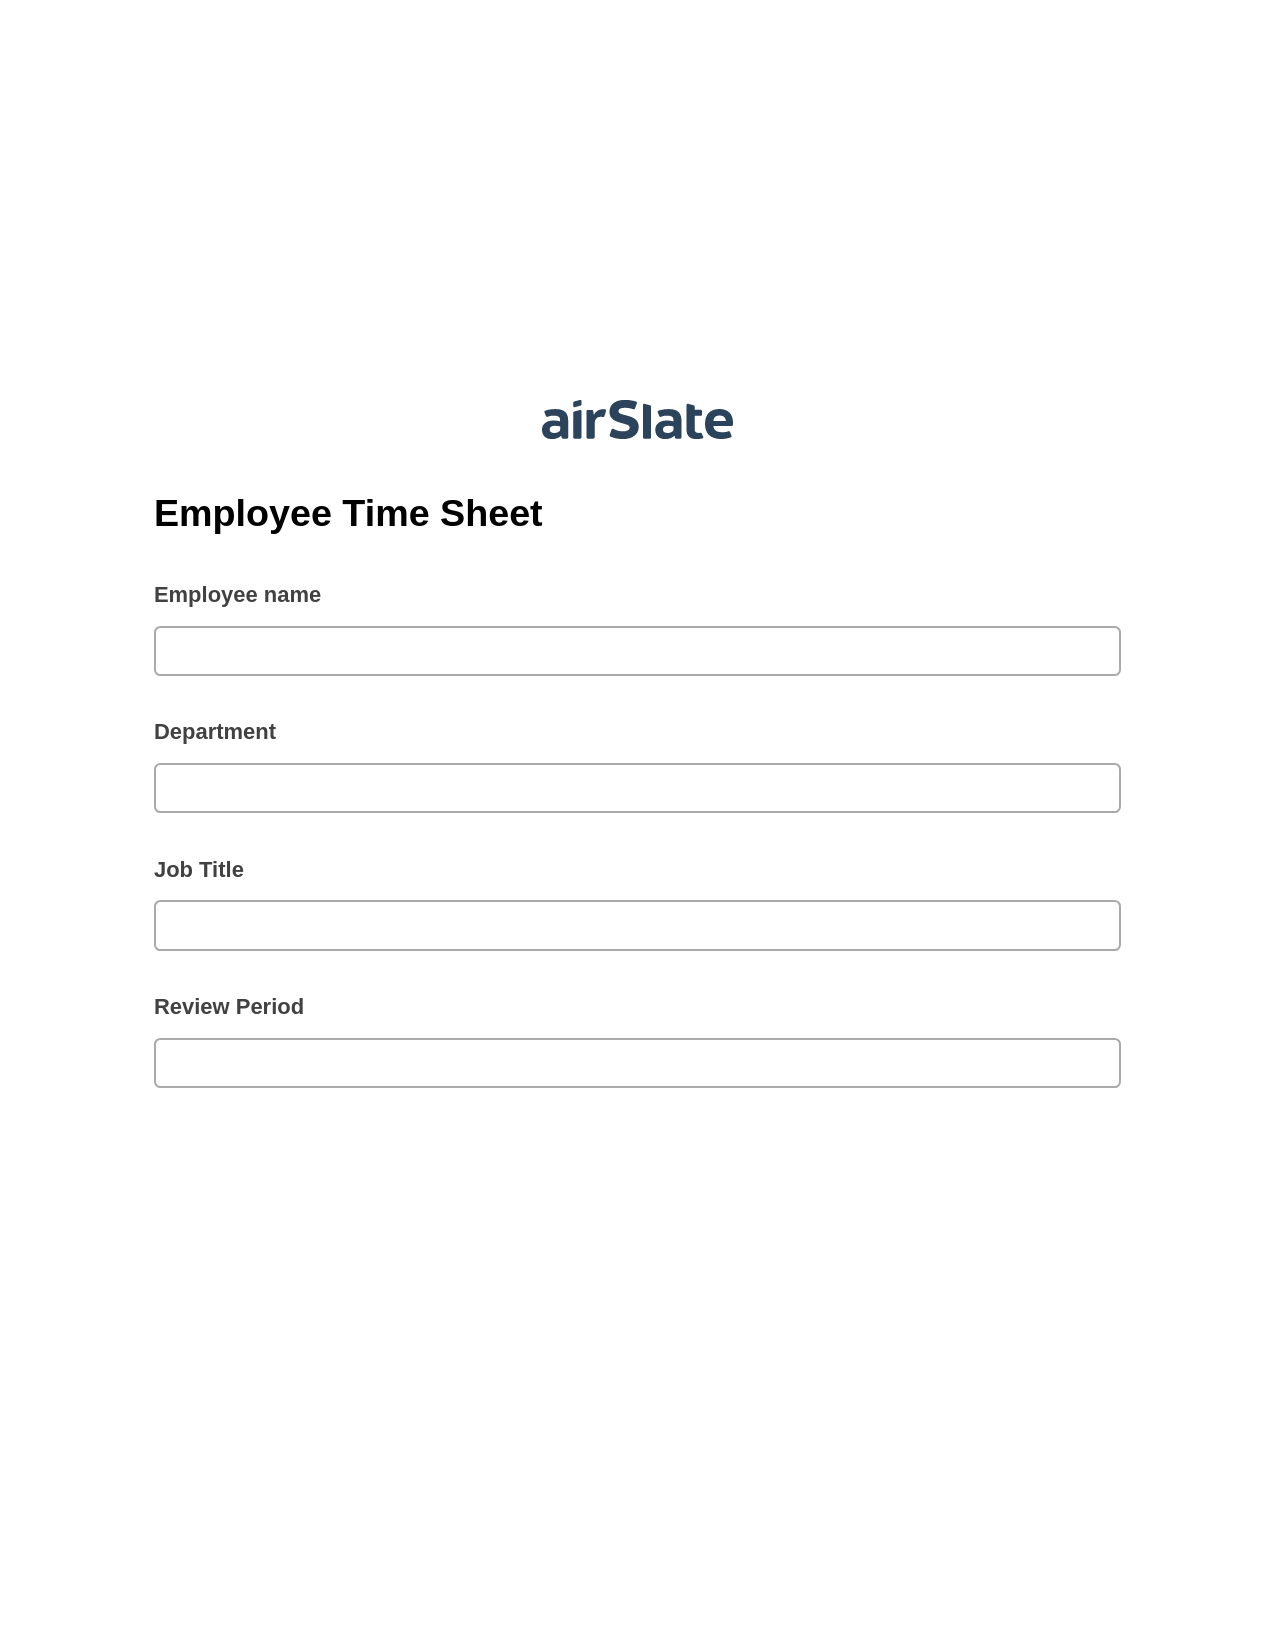 Employee Time Sheet Pre-fill from Salesforce Records with SOQL Bot, Create slate addon, Archive to OneDrive Bot